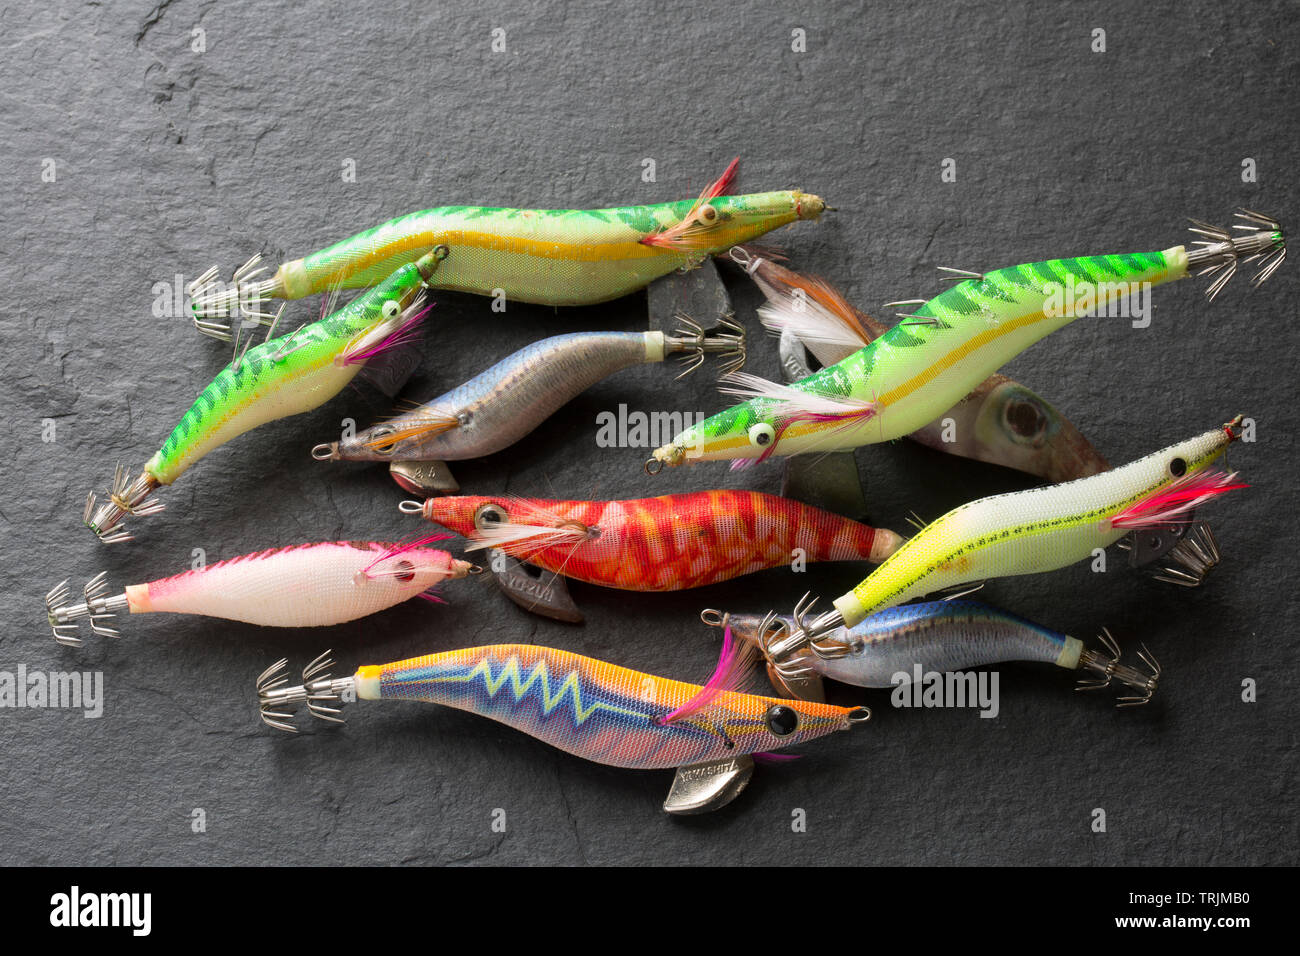 A selection of squid jigs, or lures. Squid fishing has become popular in the UK both for commercial fishermen as well as recreational anglers. The lur Stock Photo